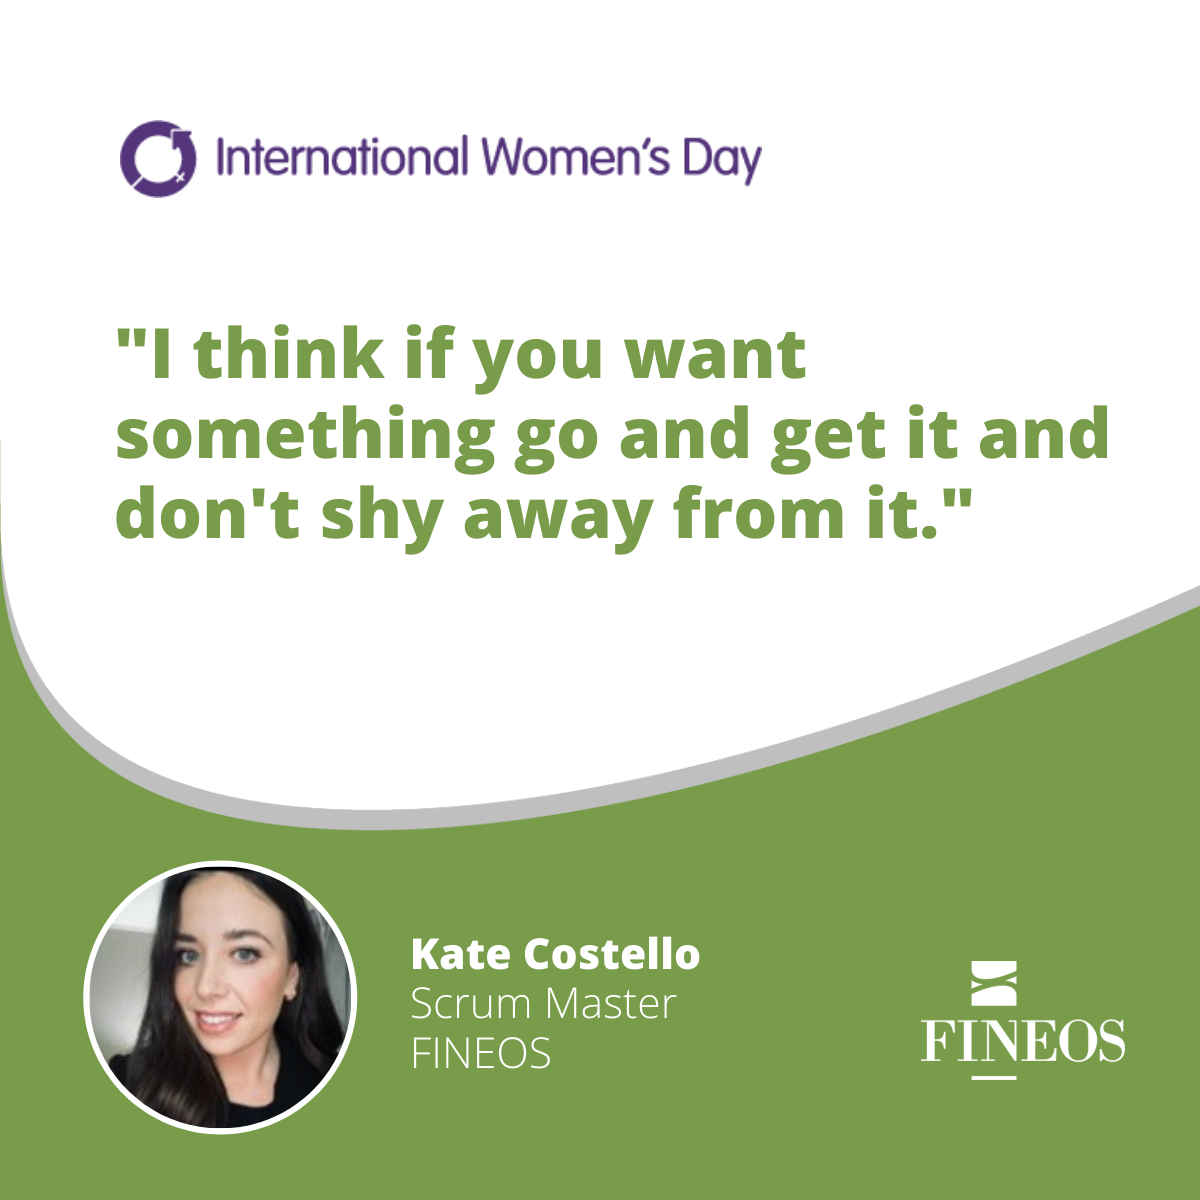 Celebrating International Women's Day 2022 - A Conversation with Kate Costello